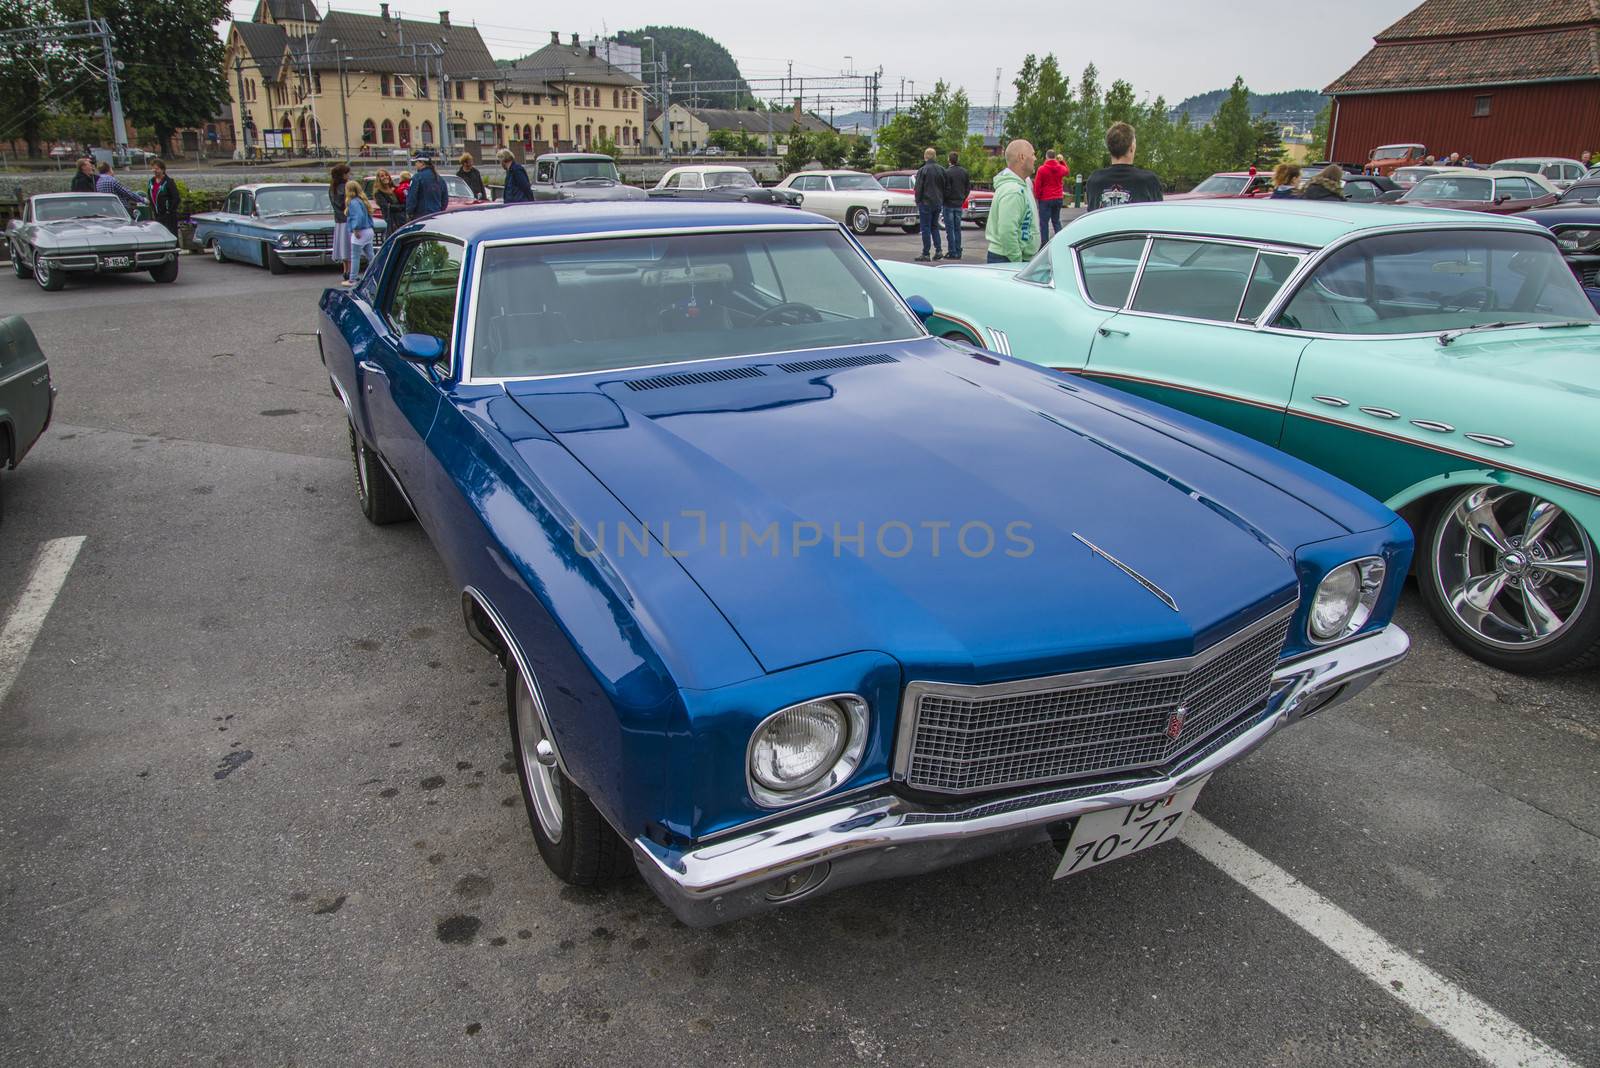 1970 chevrolet monte carlo by steirus